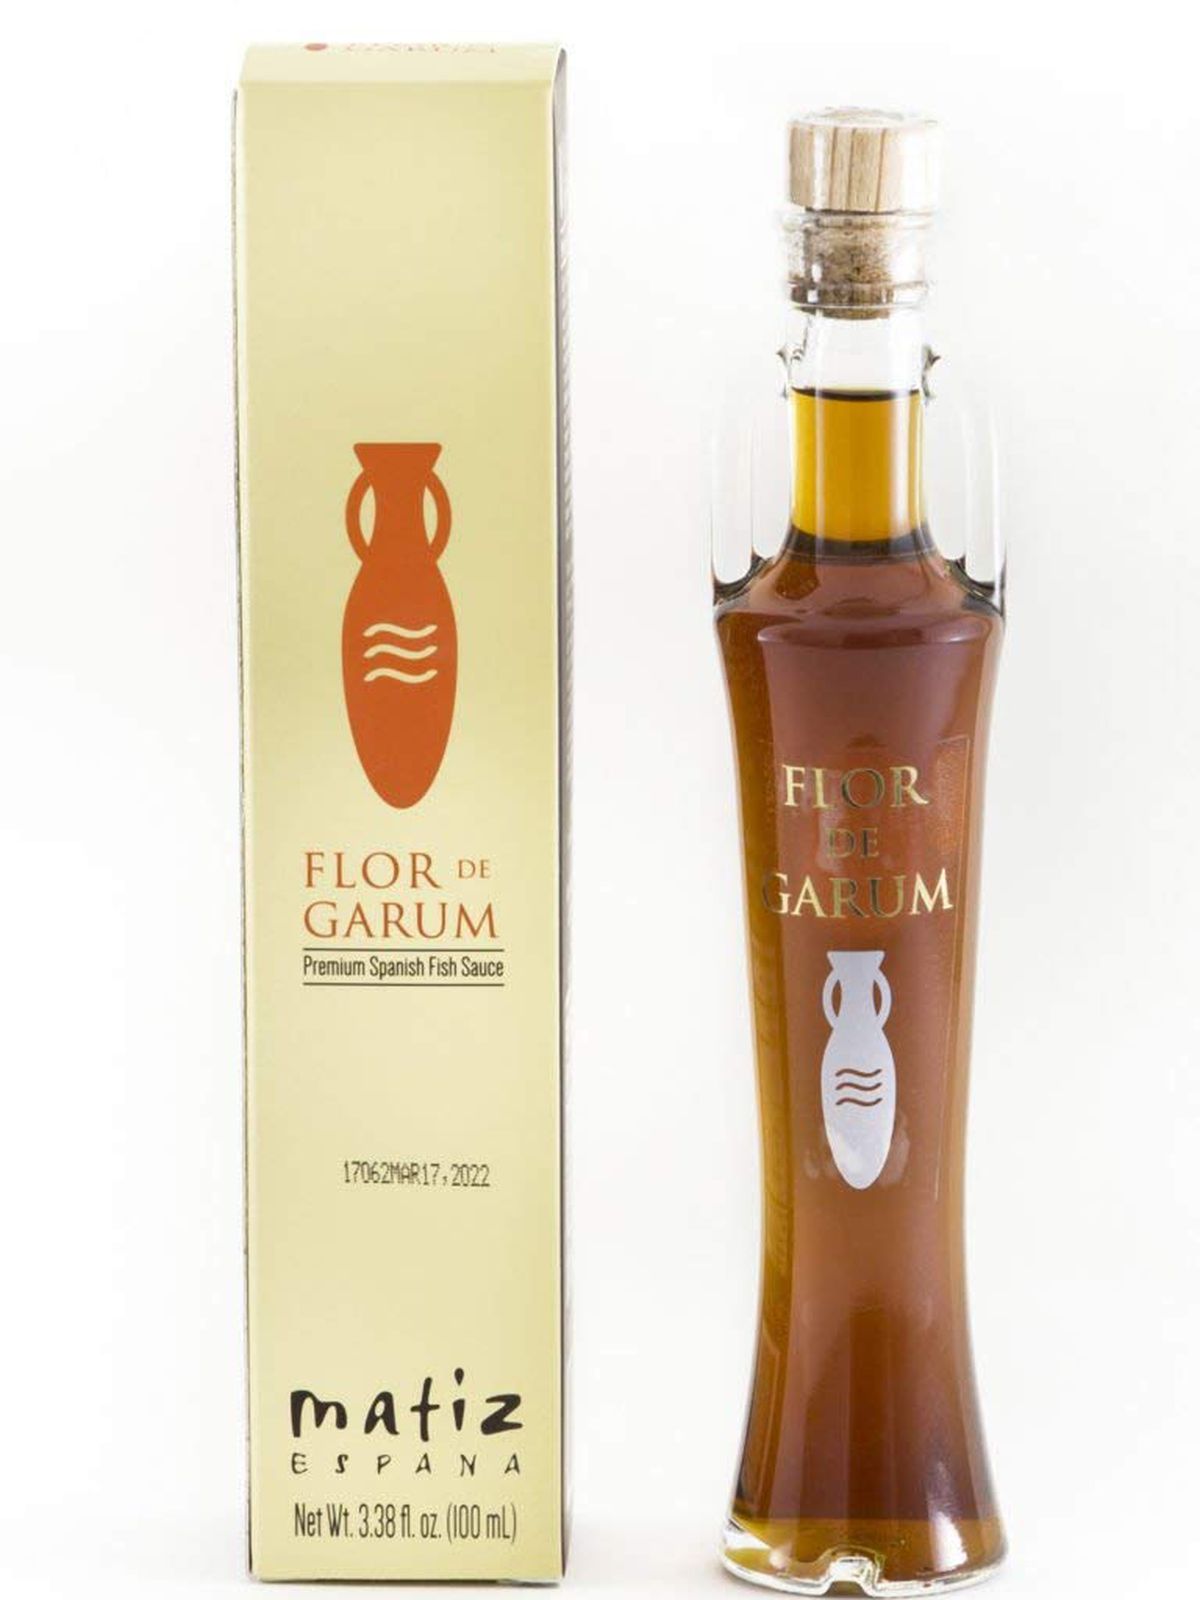 A bottle of garum and its box